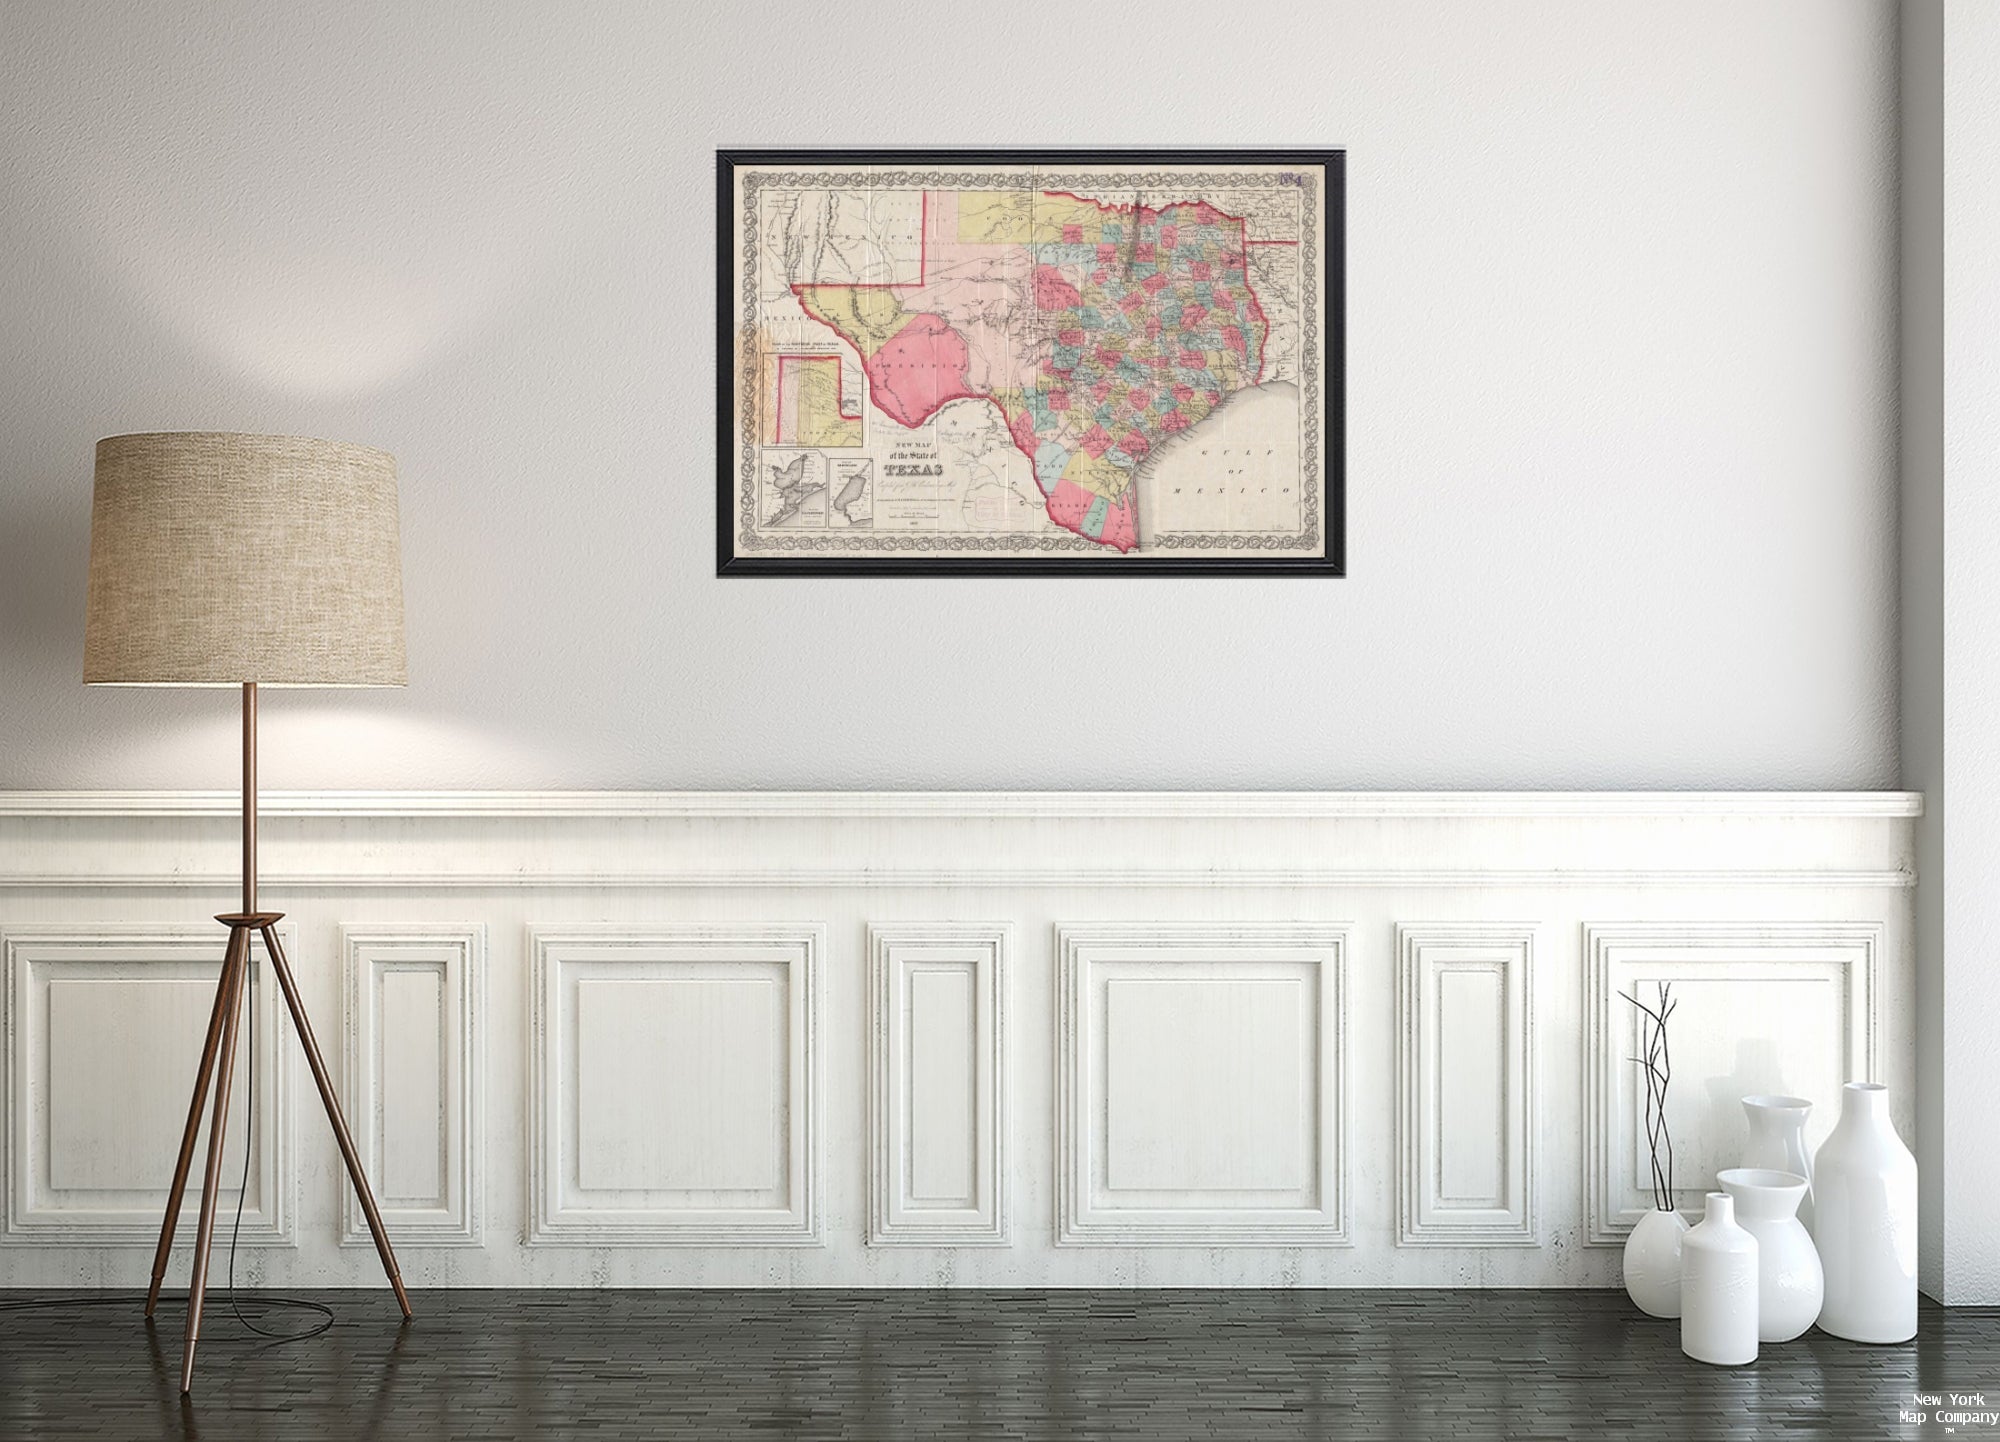 1857 Map Texas|Galveston Bay|Sabine Pass|New of the state of Texas Relief shown